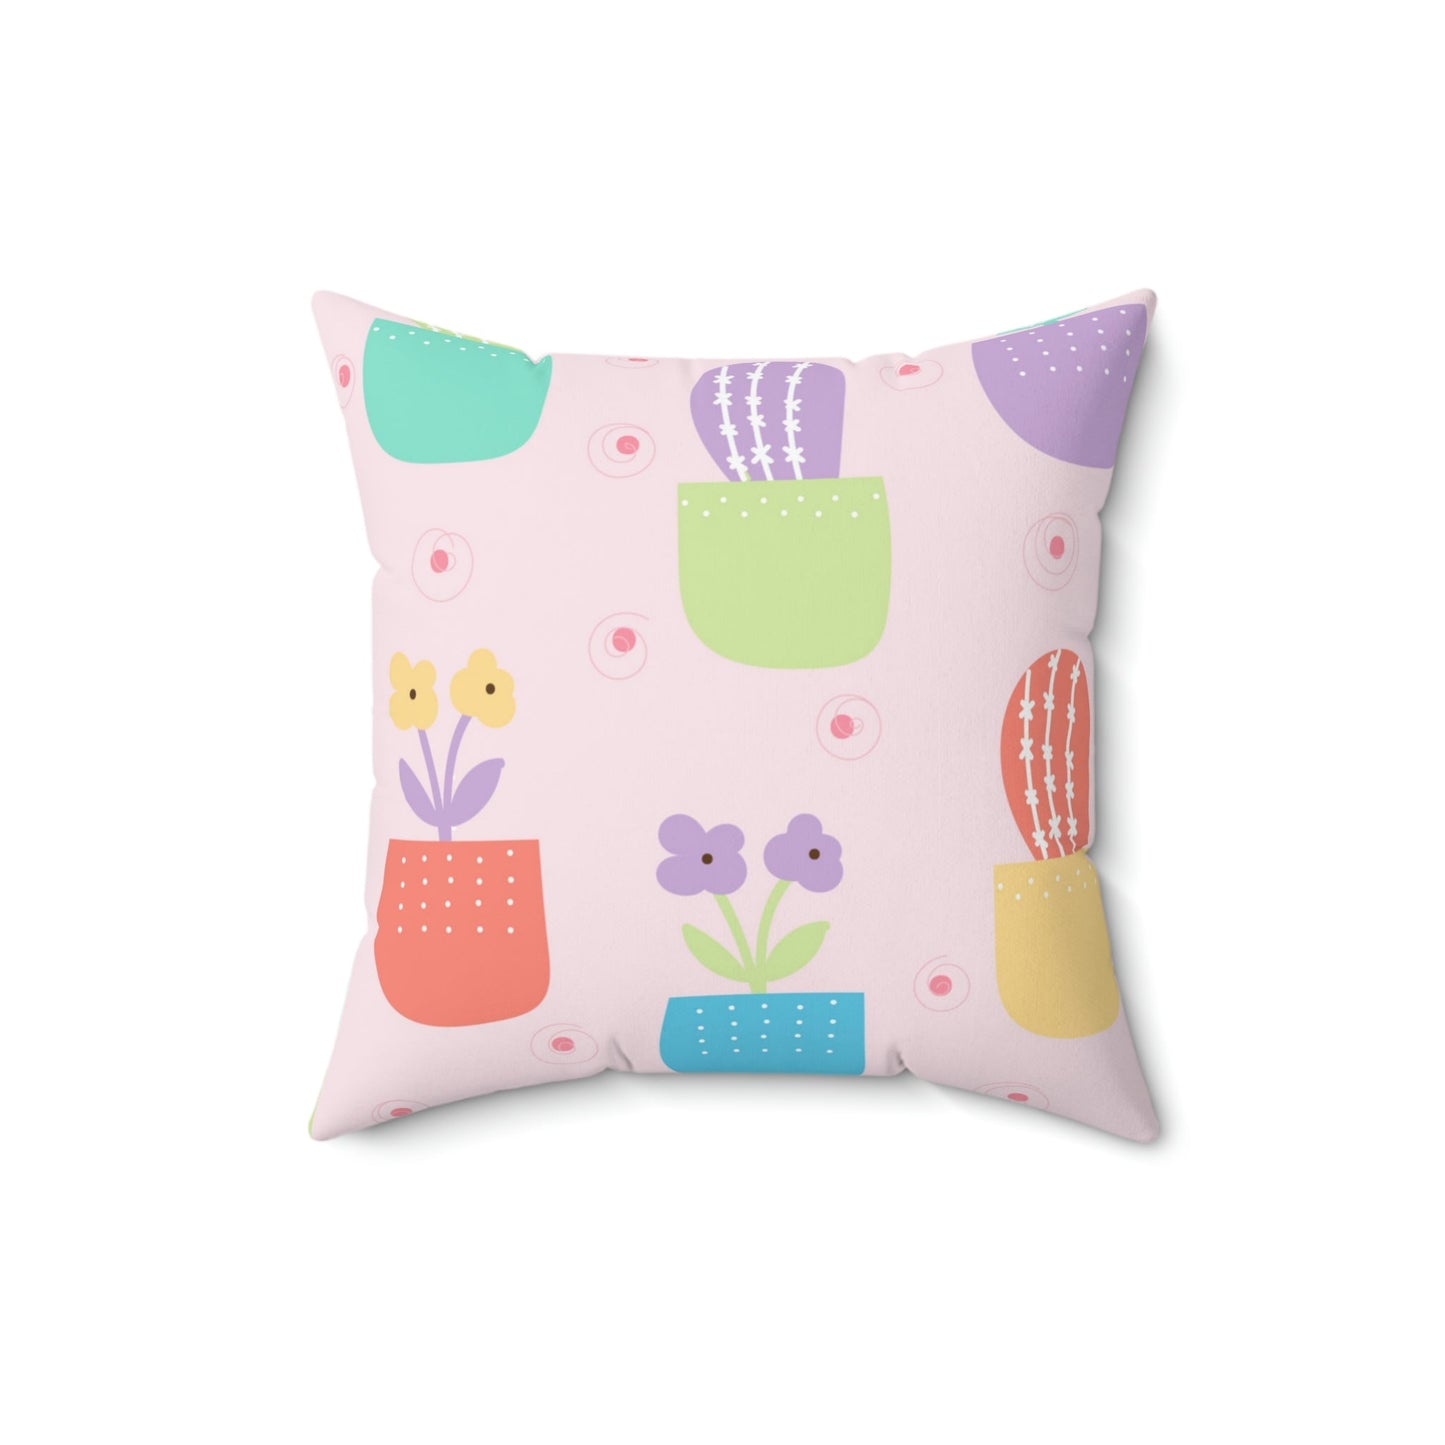 Precious Potted Plants Square Pillow Home Decor Pink Sweetheart